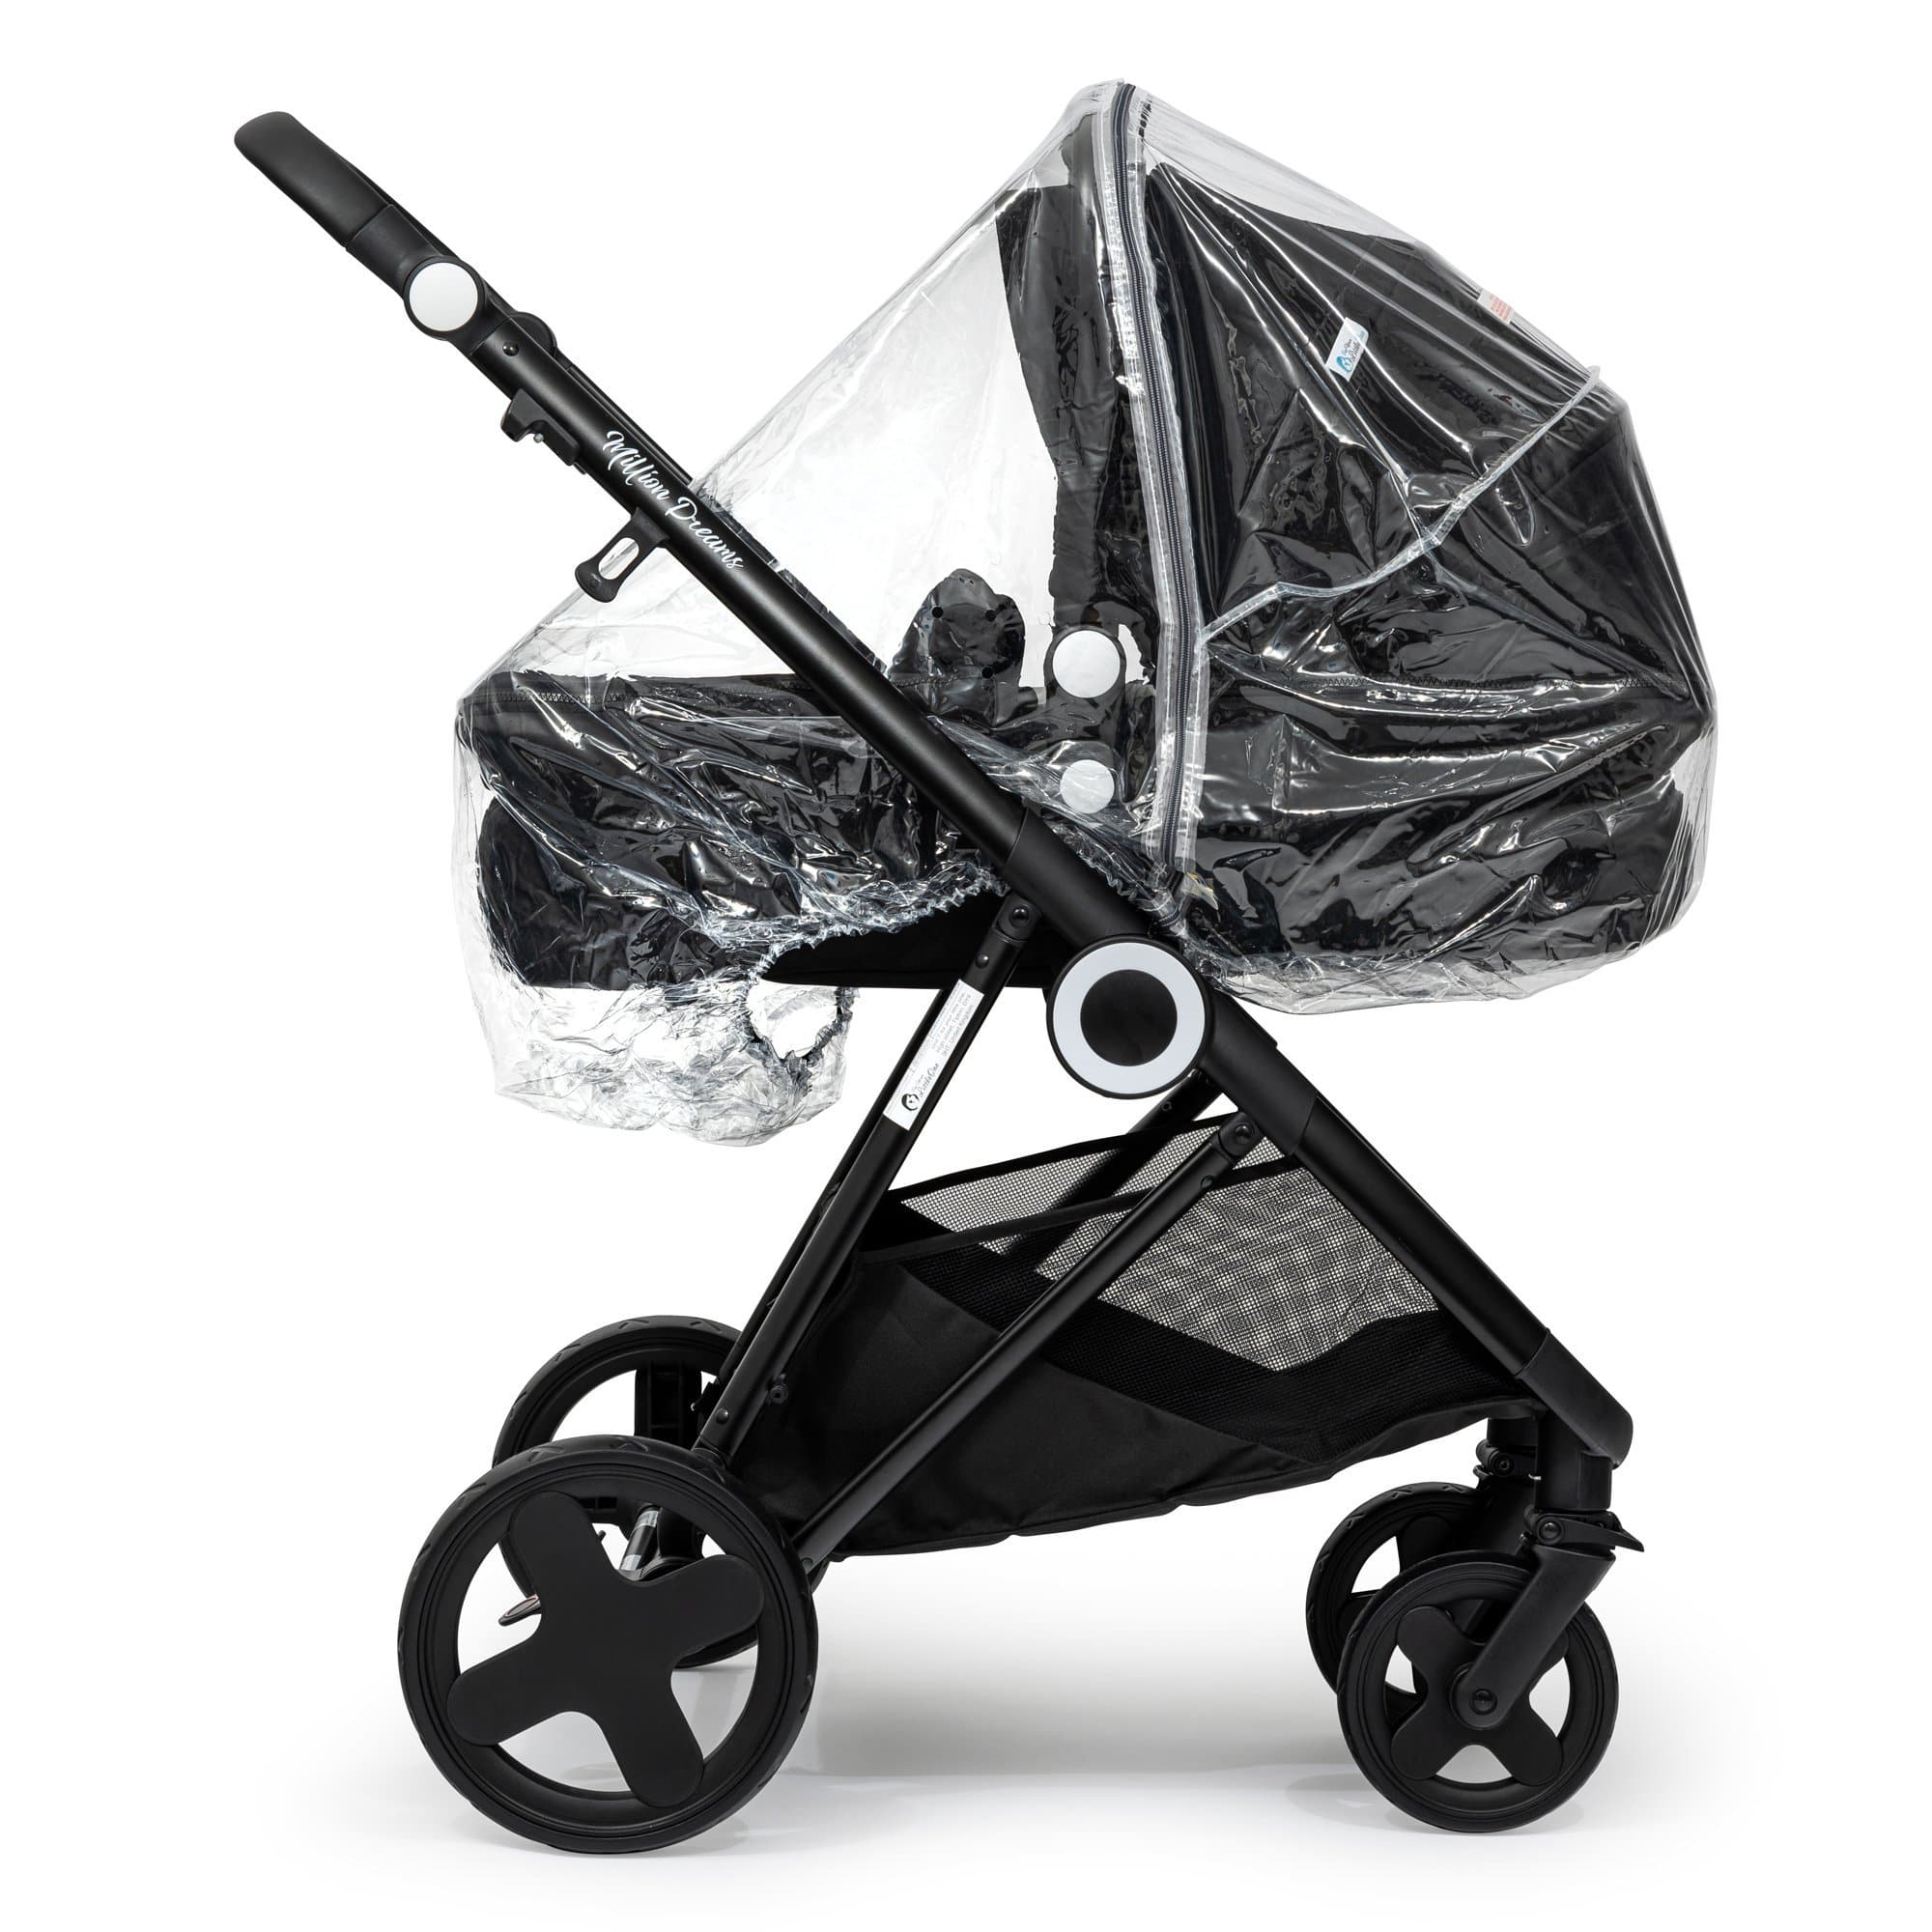 2 in 1 Rain Cover Compatible with Little Shield - Fits All Models - For Your Little One